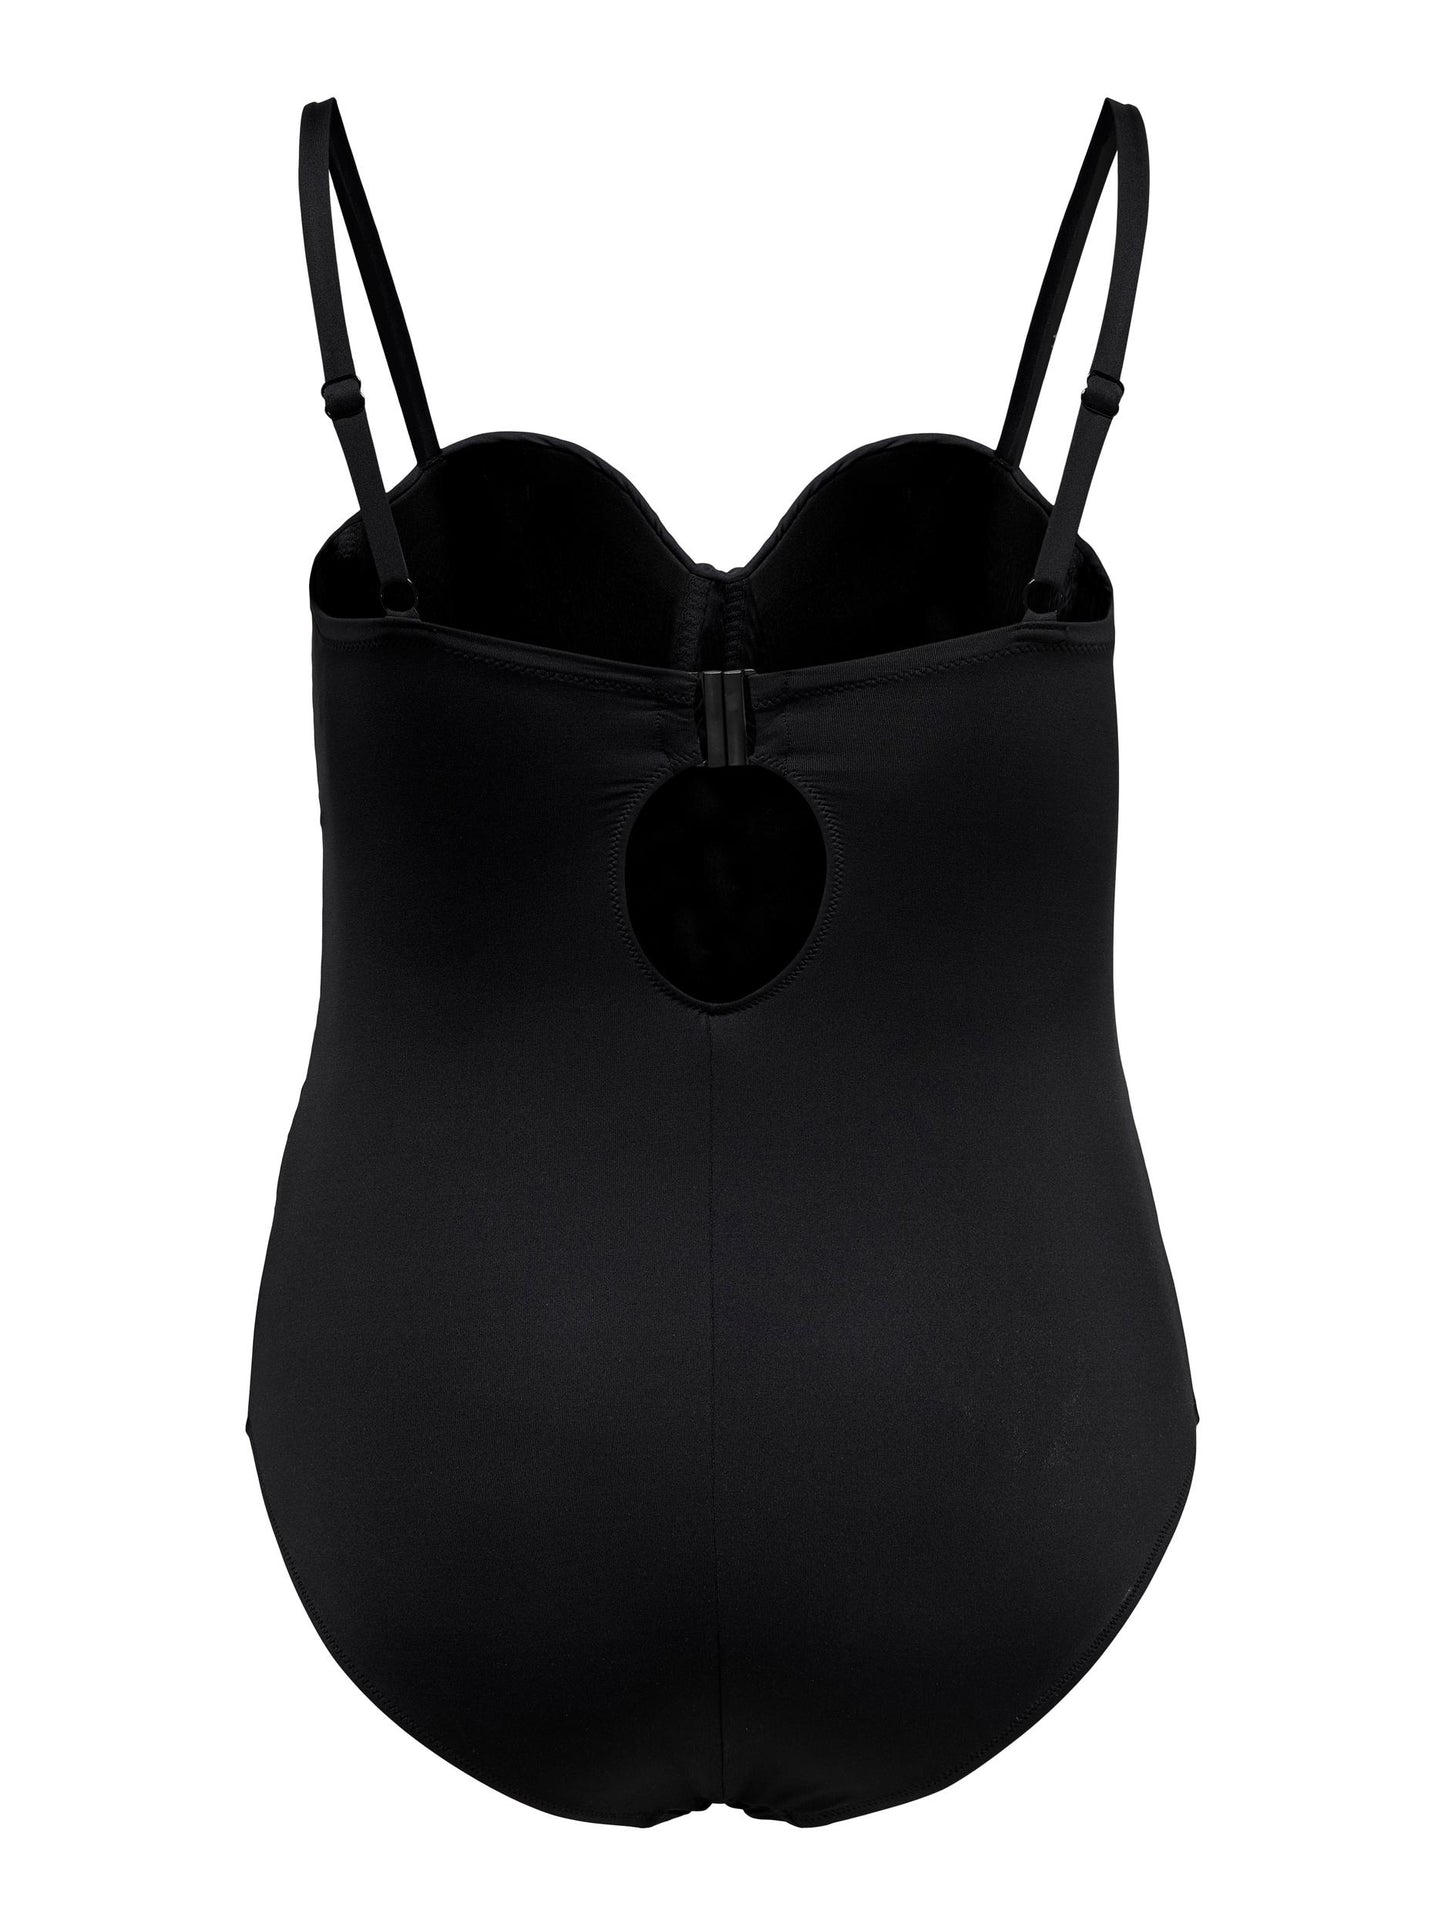 CARELLY SWIMSUIT BLACK